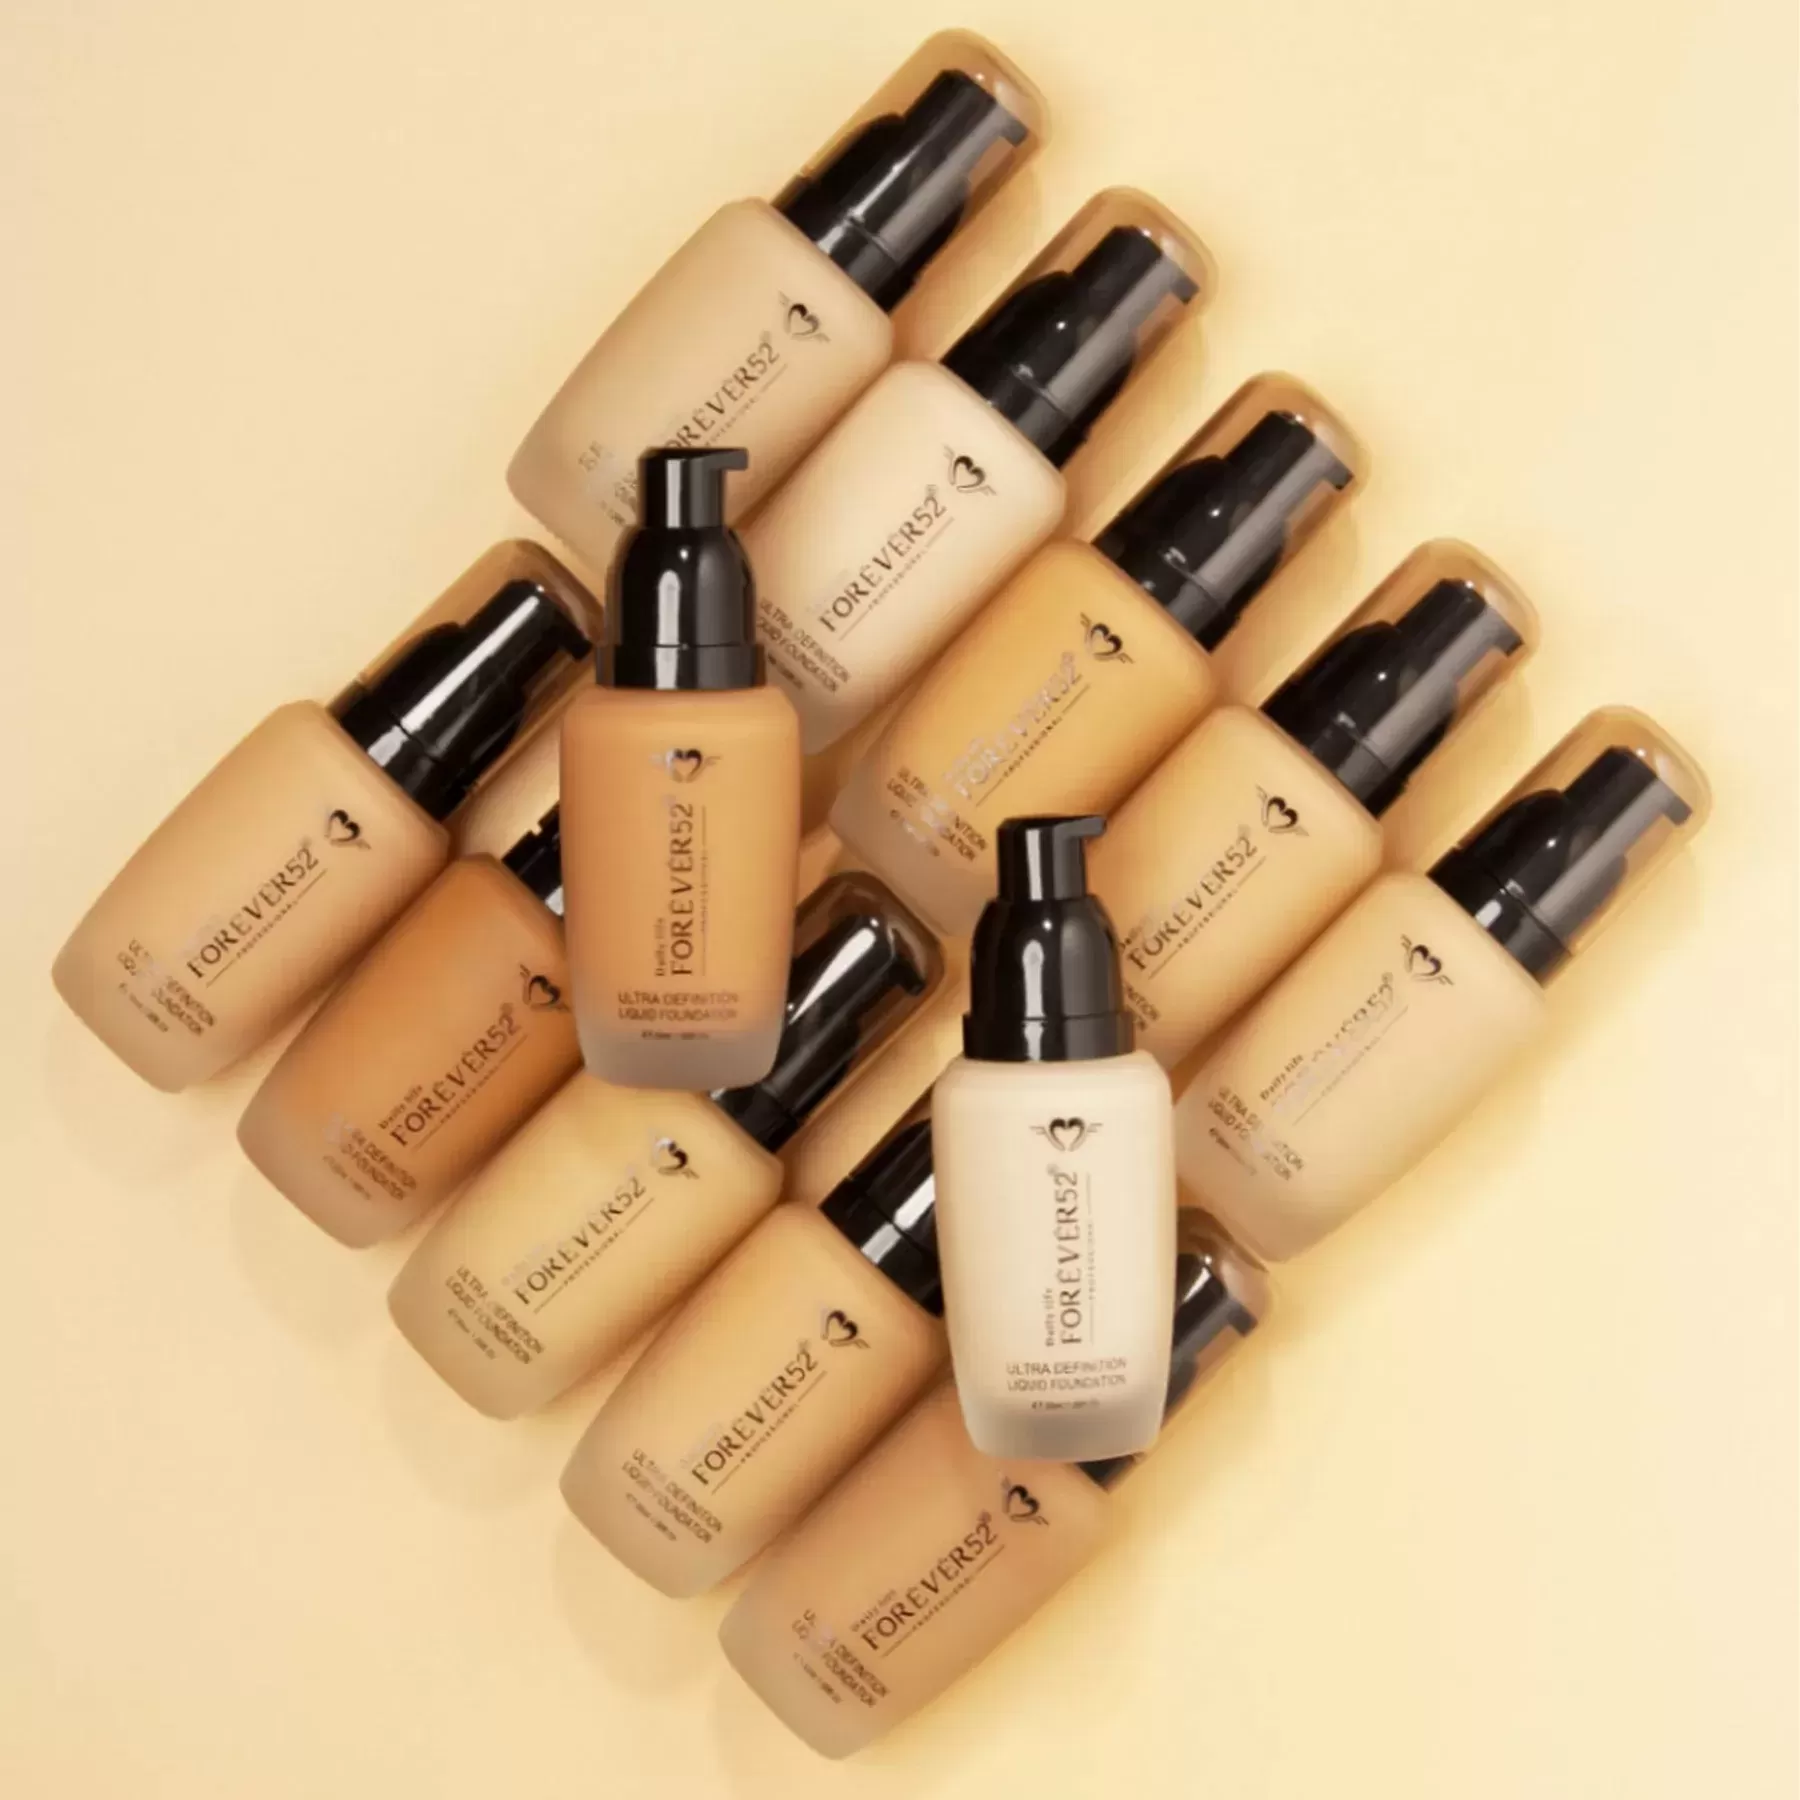 about Foundation FOREVER52 PHOTO MATTE LIQUID FOUNDATION 